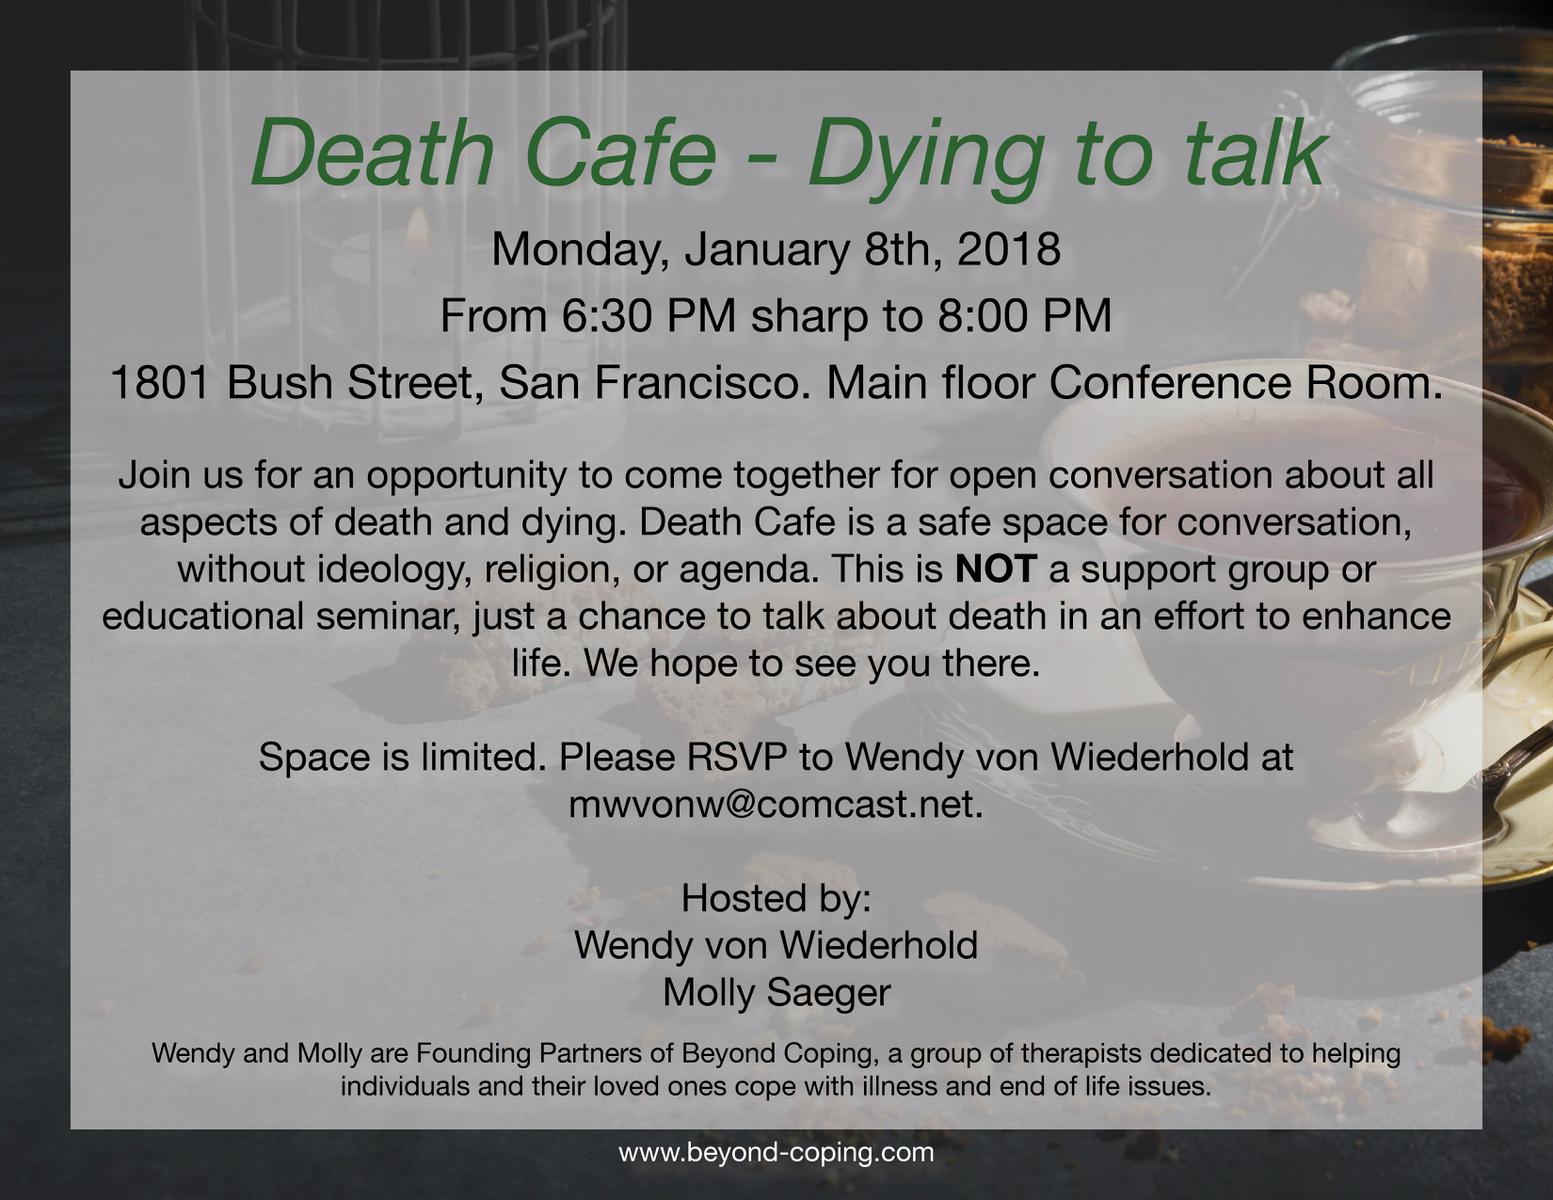 Death Cafe - Dying to talk